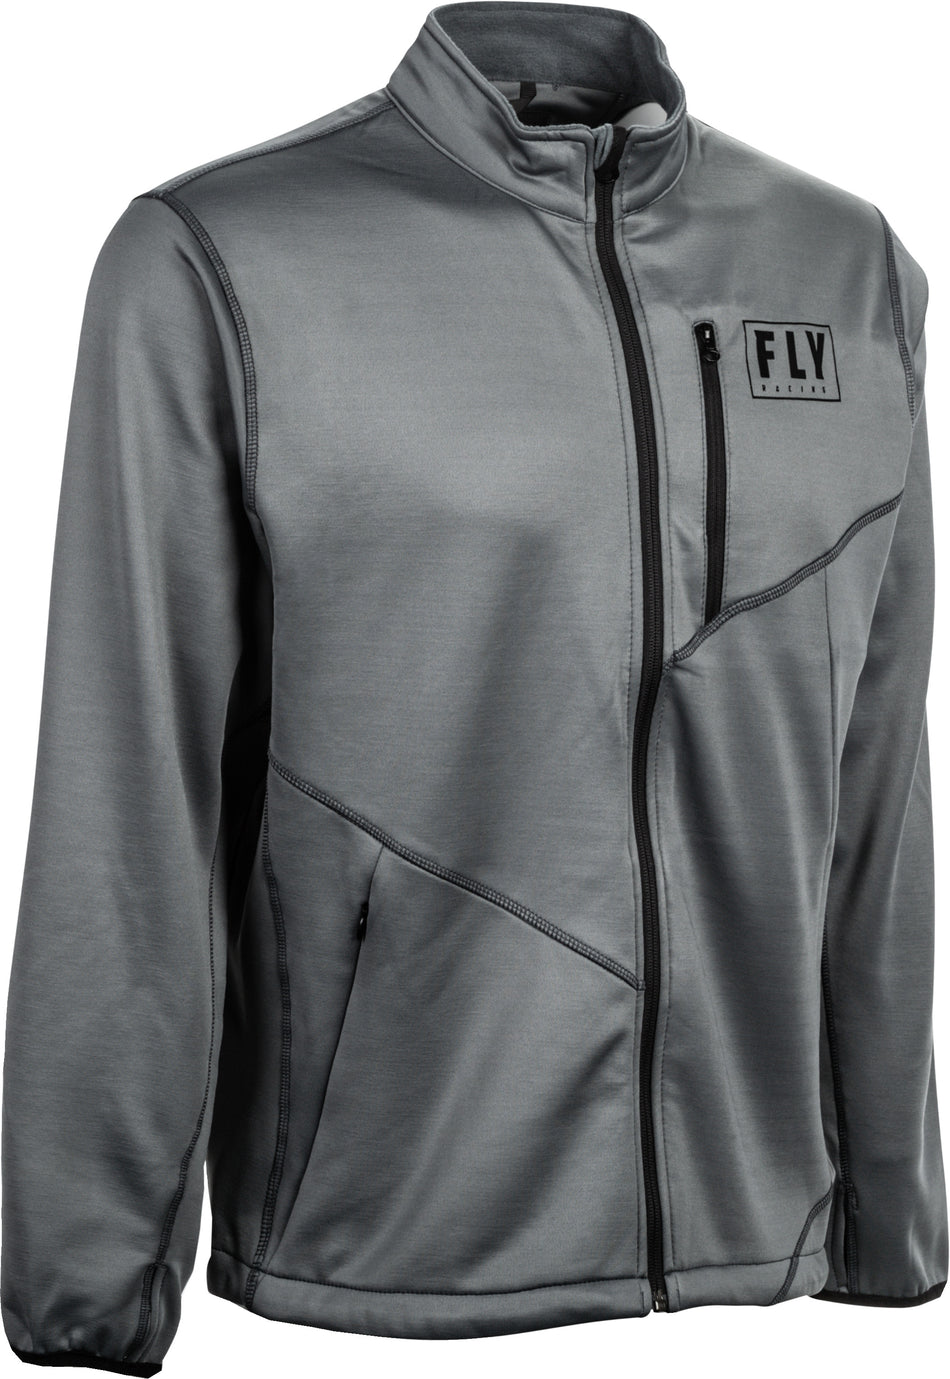 FLY RACING Mid-Layer Jacket Arctic Grey Md 354-6322M